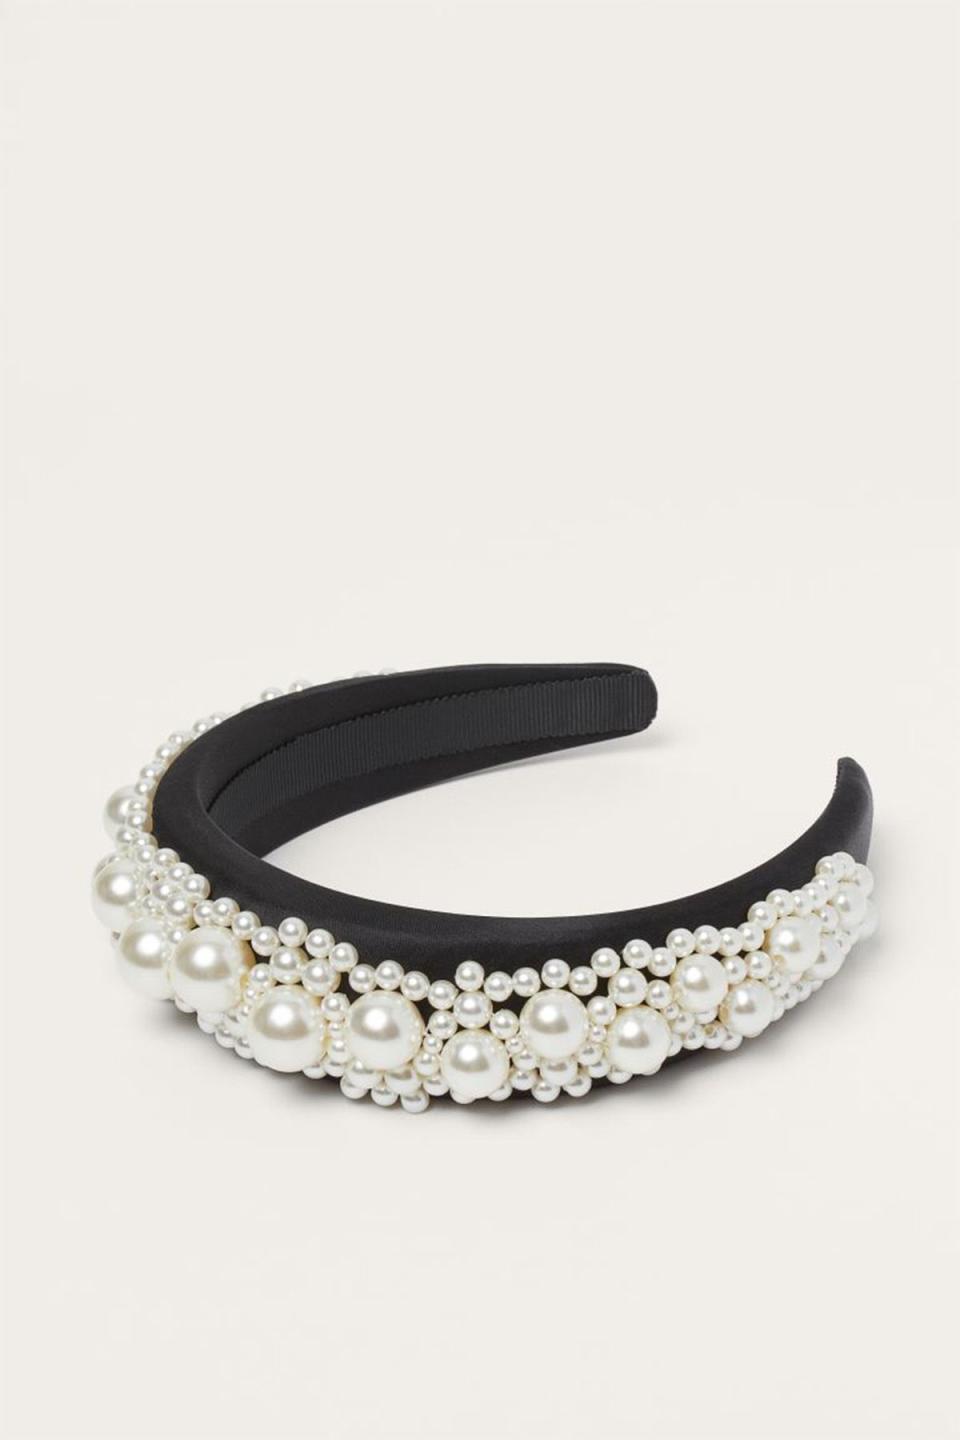 7) Hairband with Faux Pearls